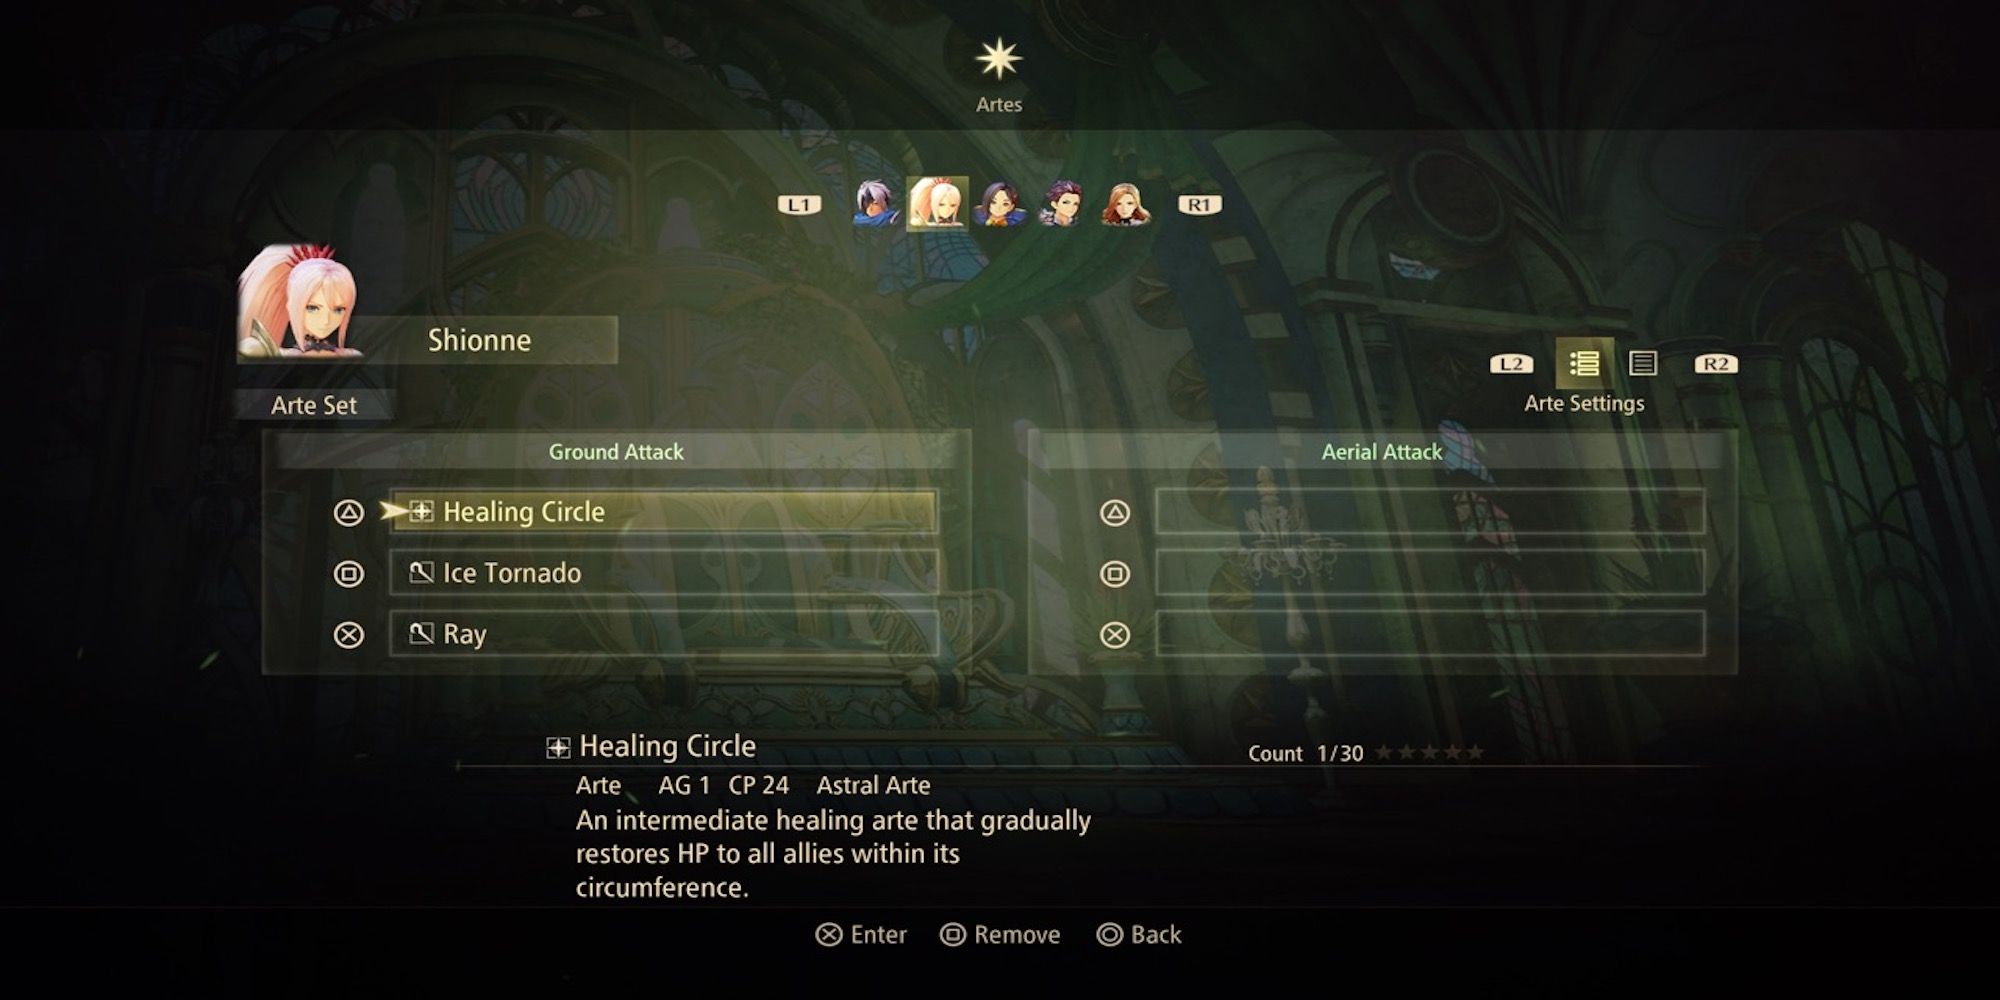 Healing Circle in the Artes menu from Tales of Arise